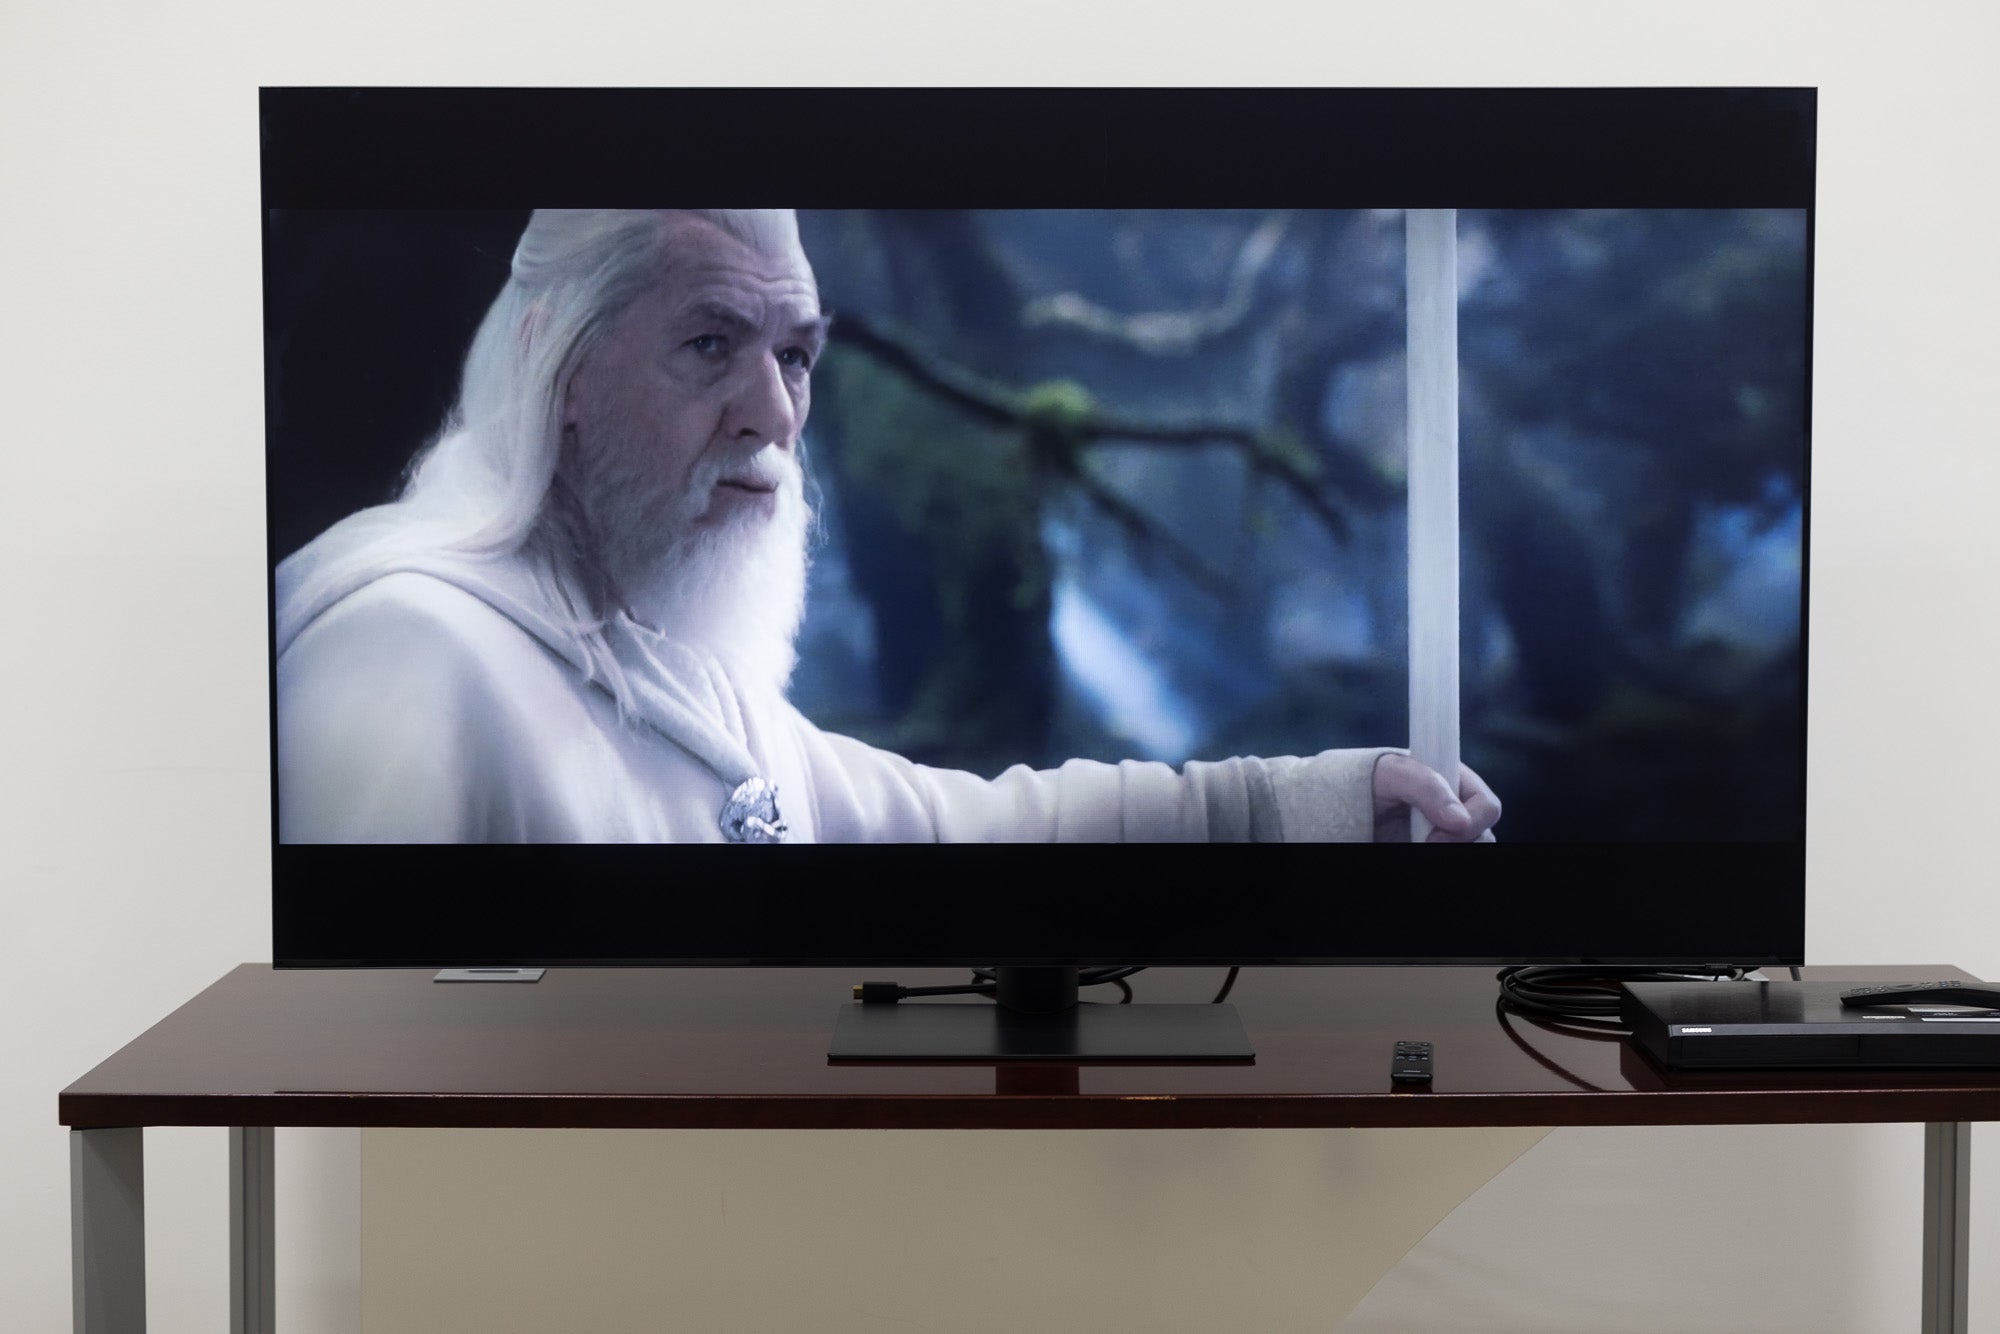 The Samsung QN90C TV on a stand in a room showing the Lord of the Rings.